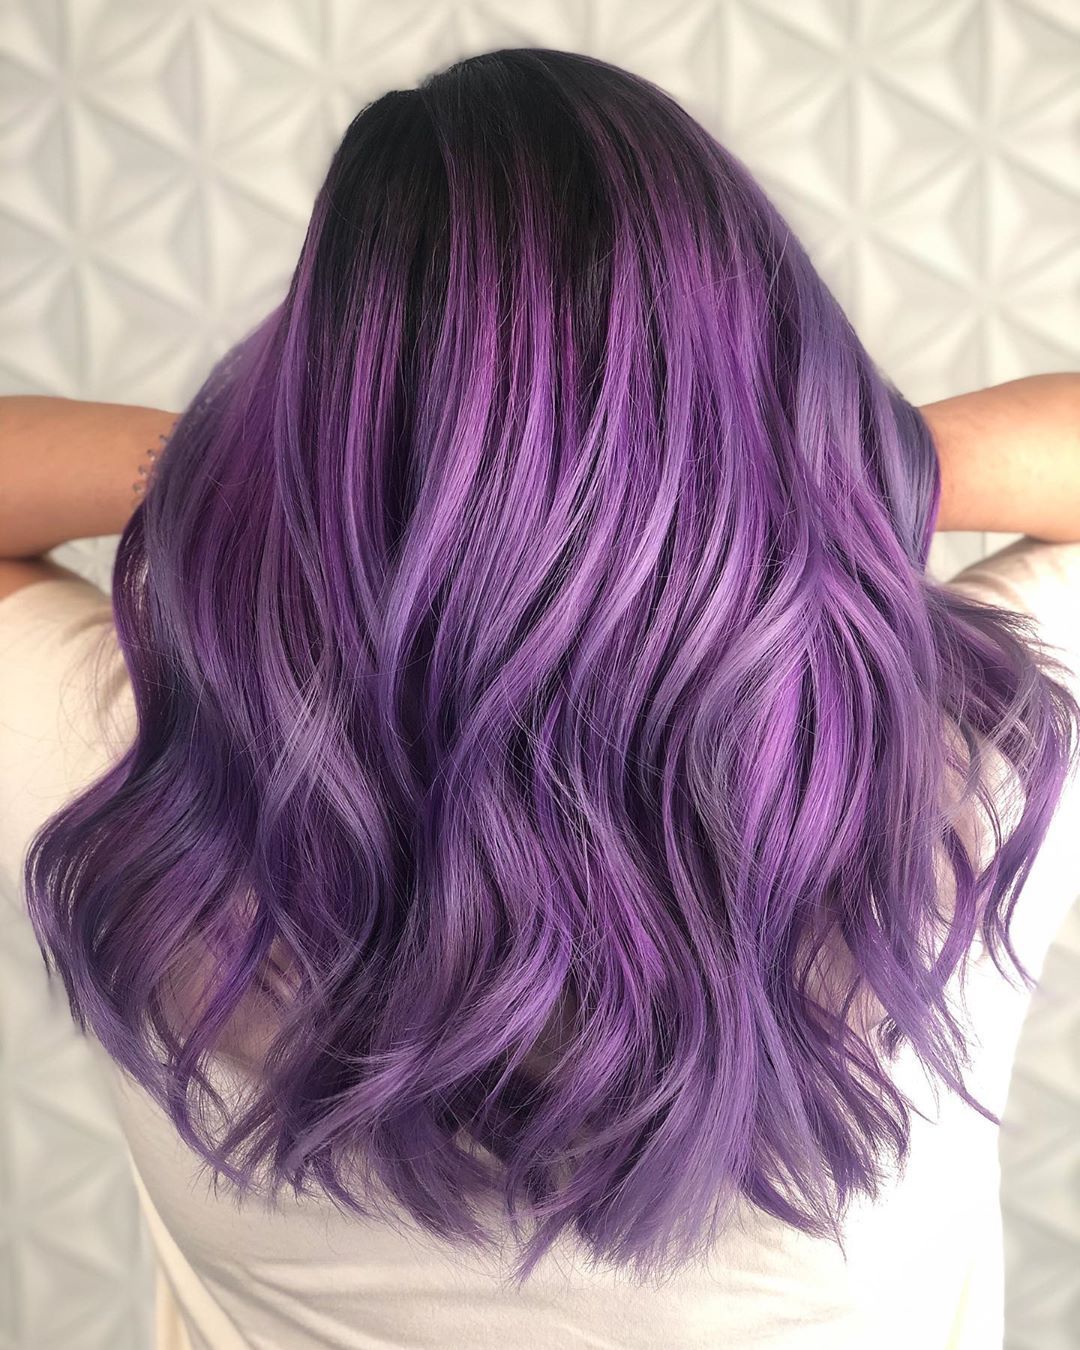 What color goes over purple hair